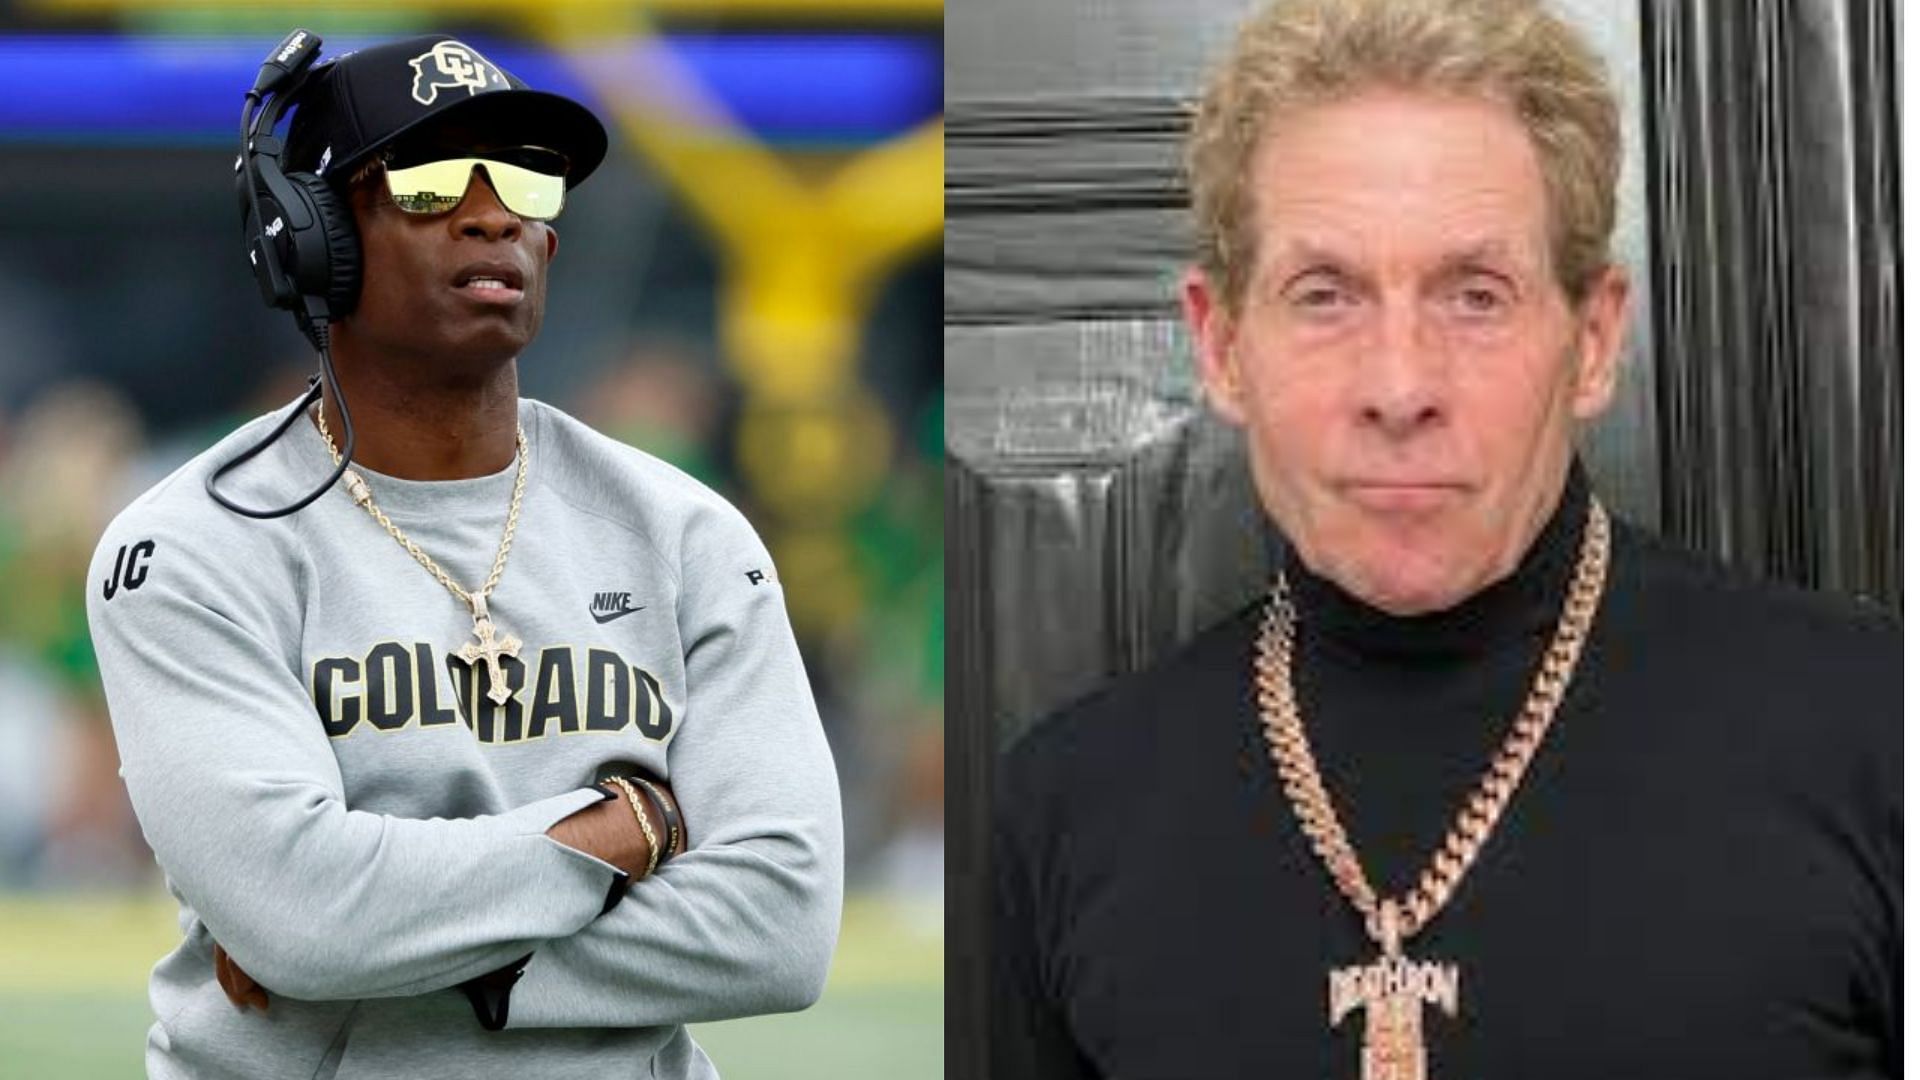 Deion Sanders and Skip Bayless have shown respect for one another